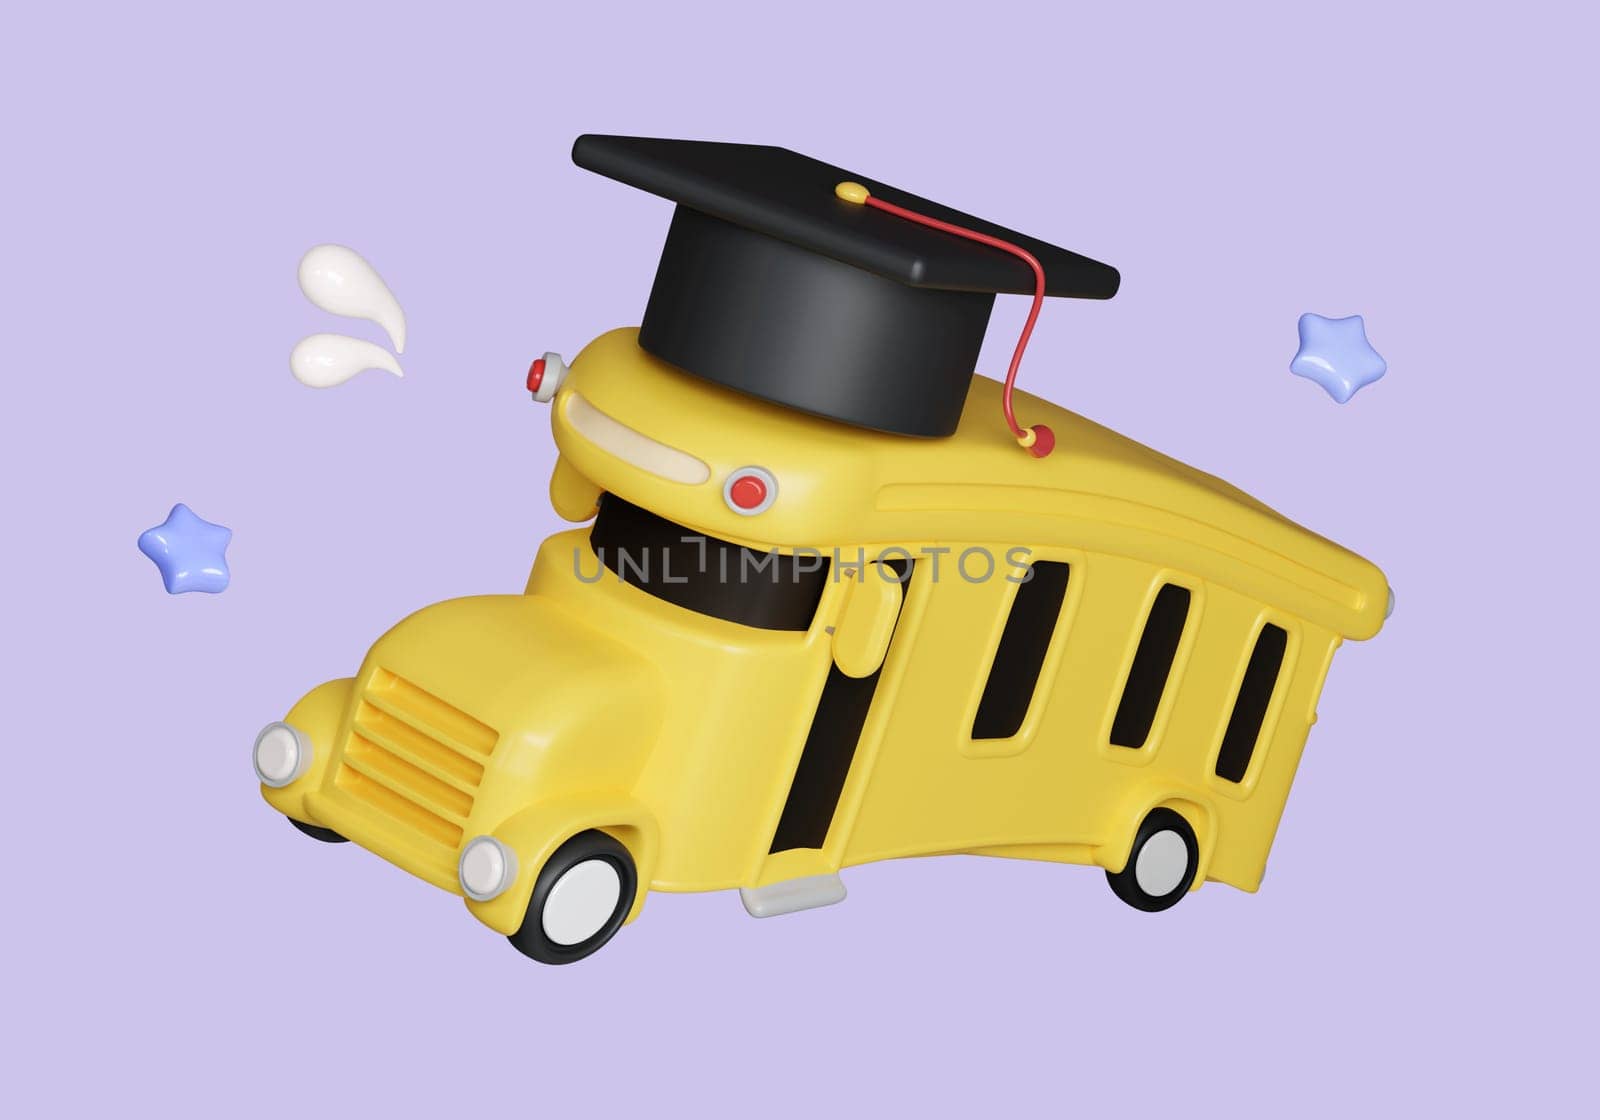 3D render school bus and graduate hat icon isolated on pastel background. icon symbol clipping path. education. 3d render illustration by meepiangraphic